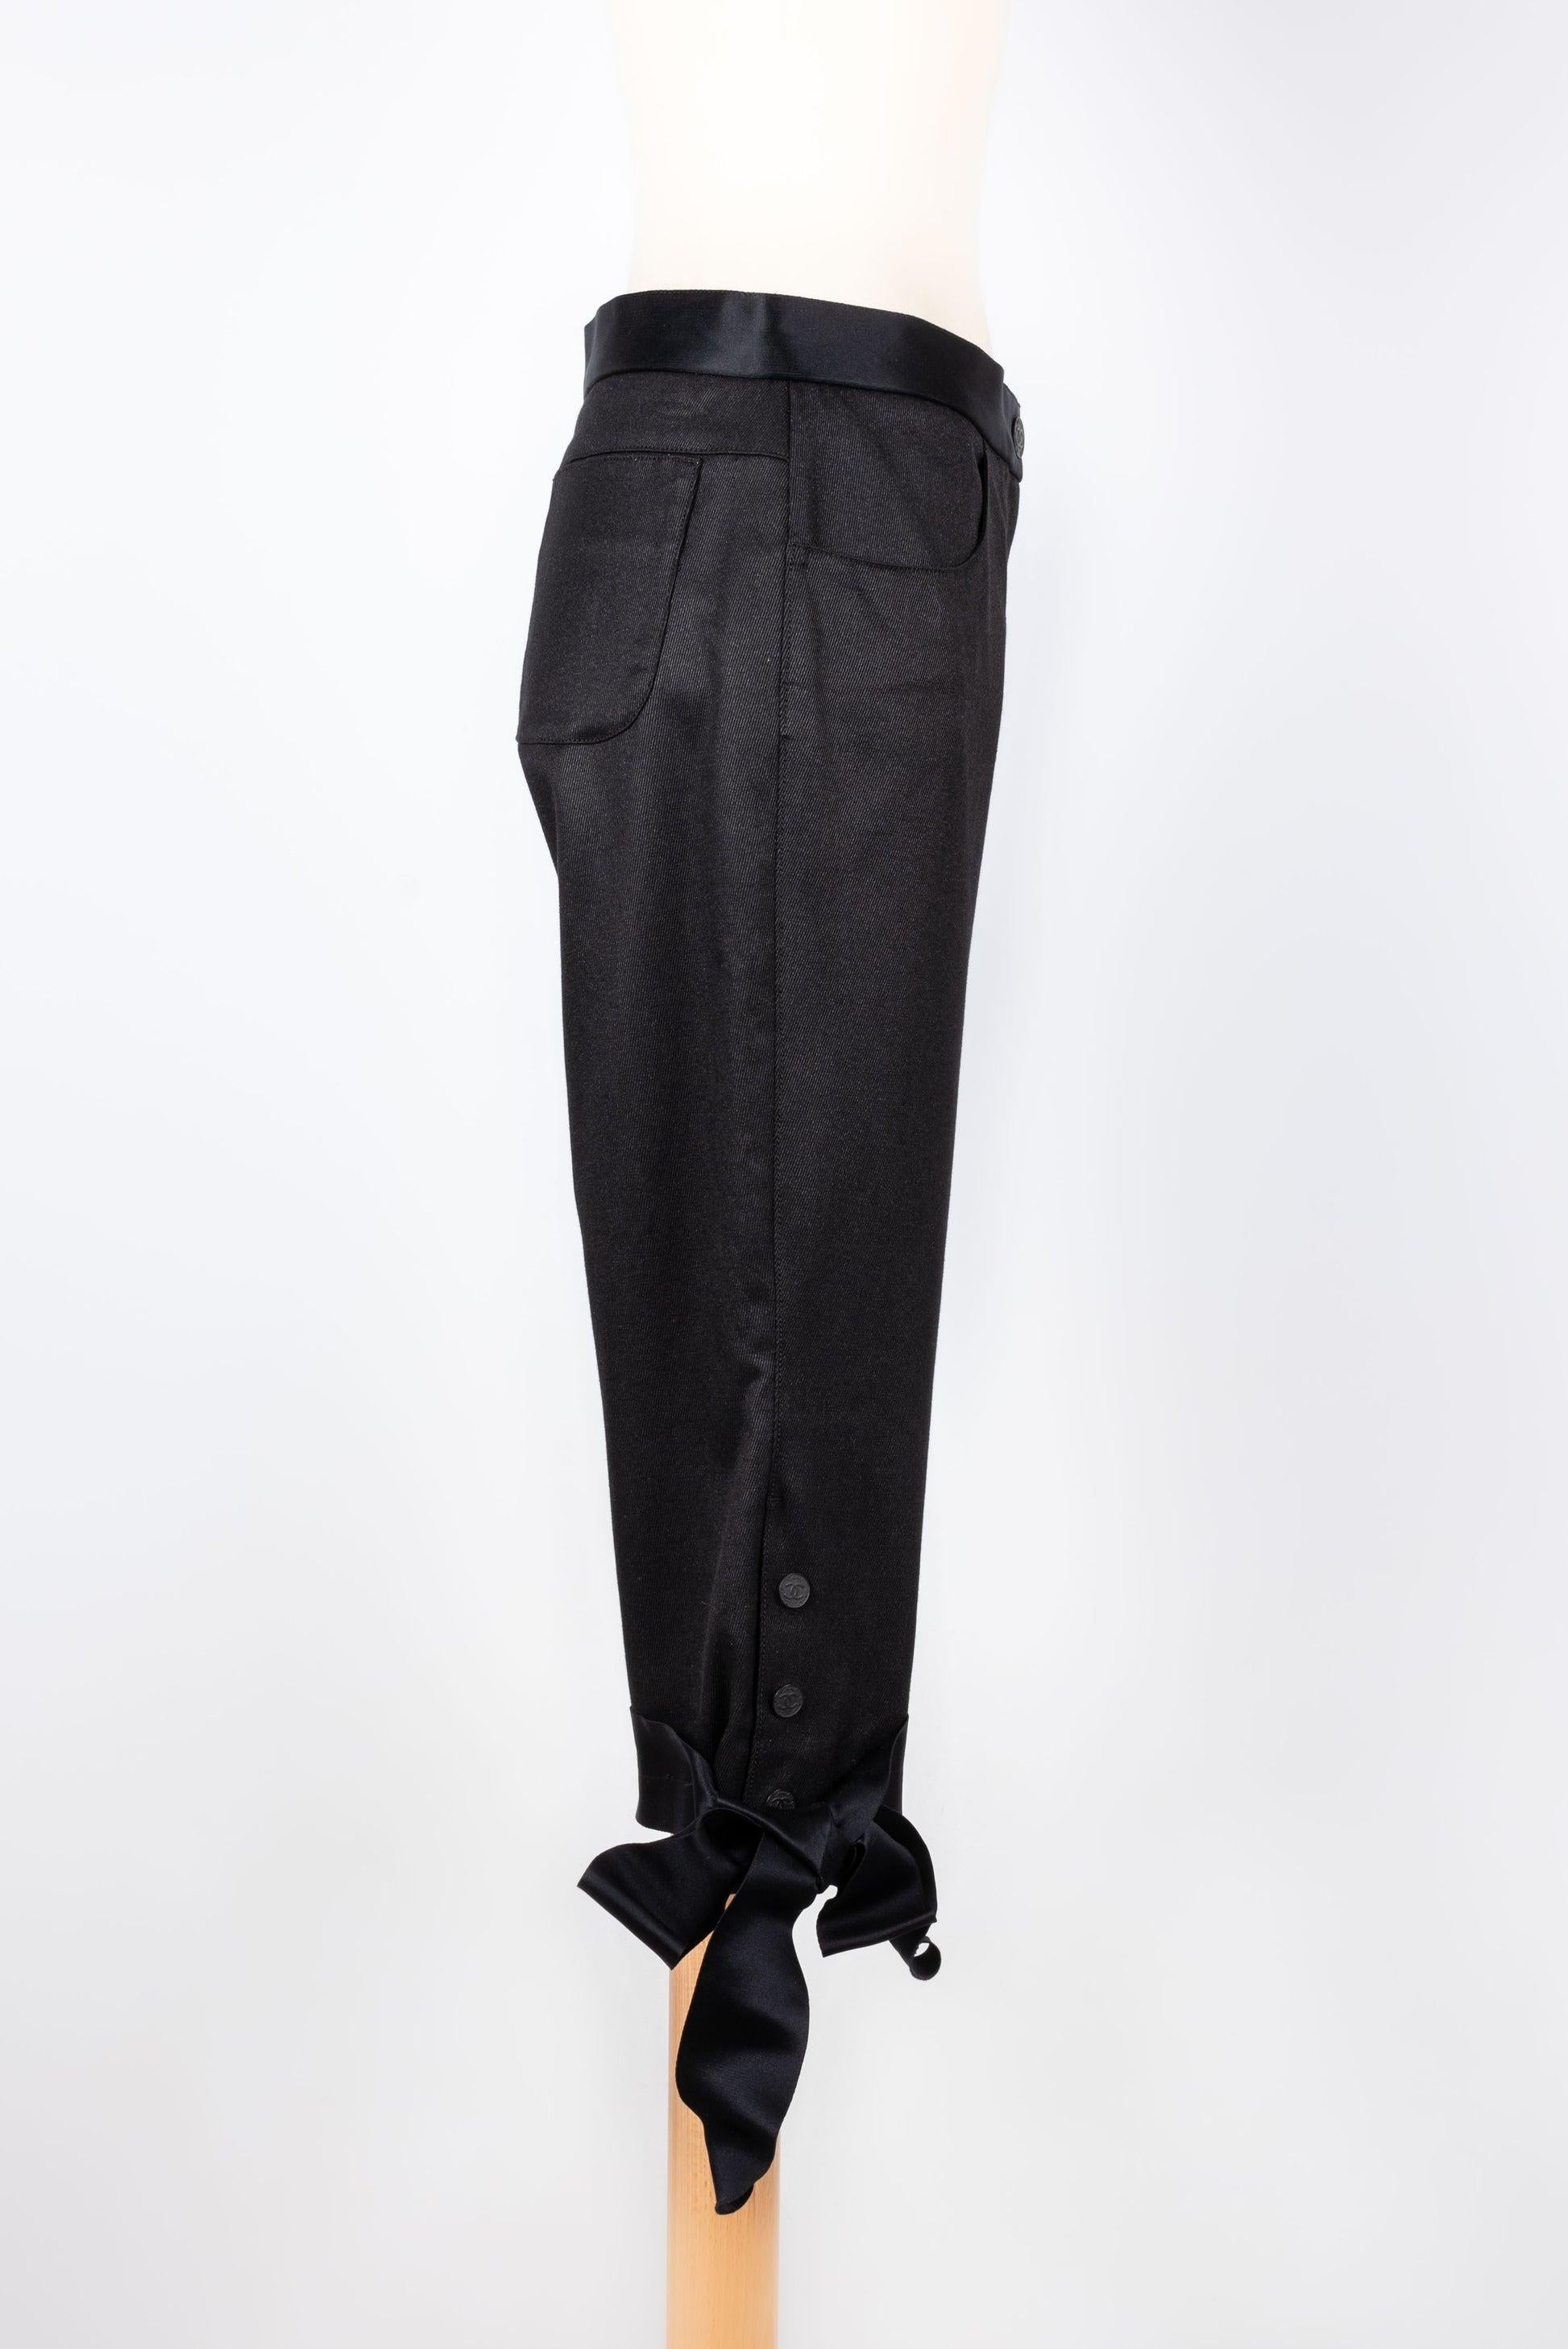 Chanel Capri Pants in Cotton and Silk, 2005 For Sale 1